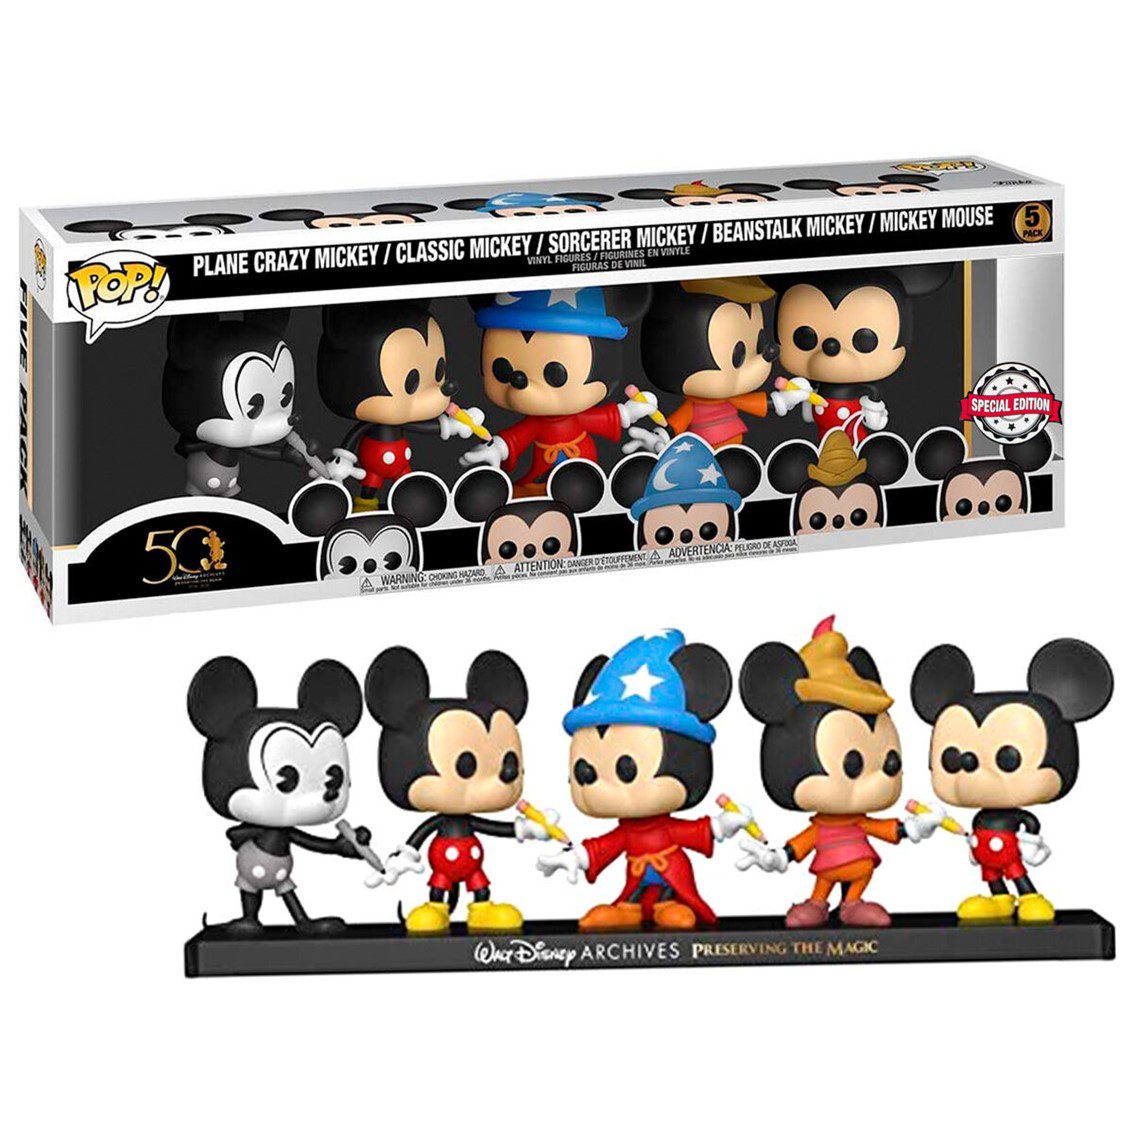 889698511186-PN-51118-Cod.-Articulo-MGS0000005168-Funko-pop-disney-archivos-pack-premium-5-mickey-mouse-51118-1